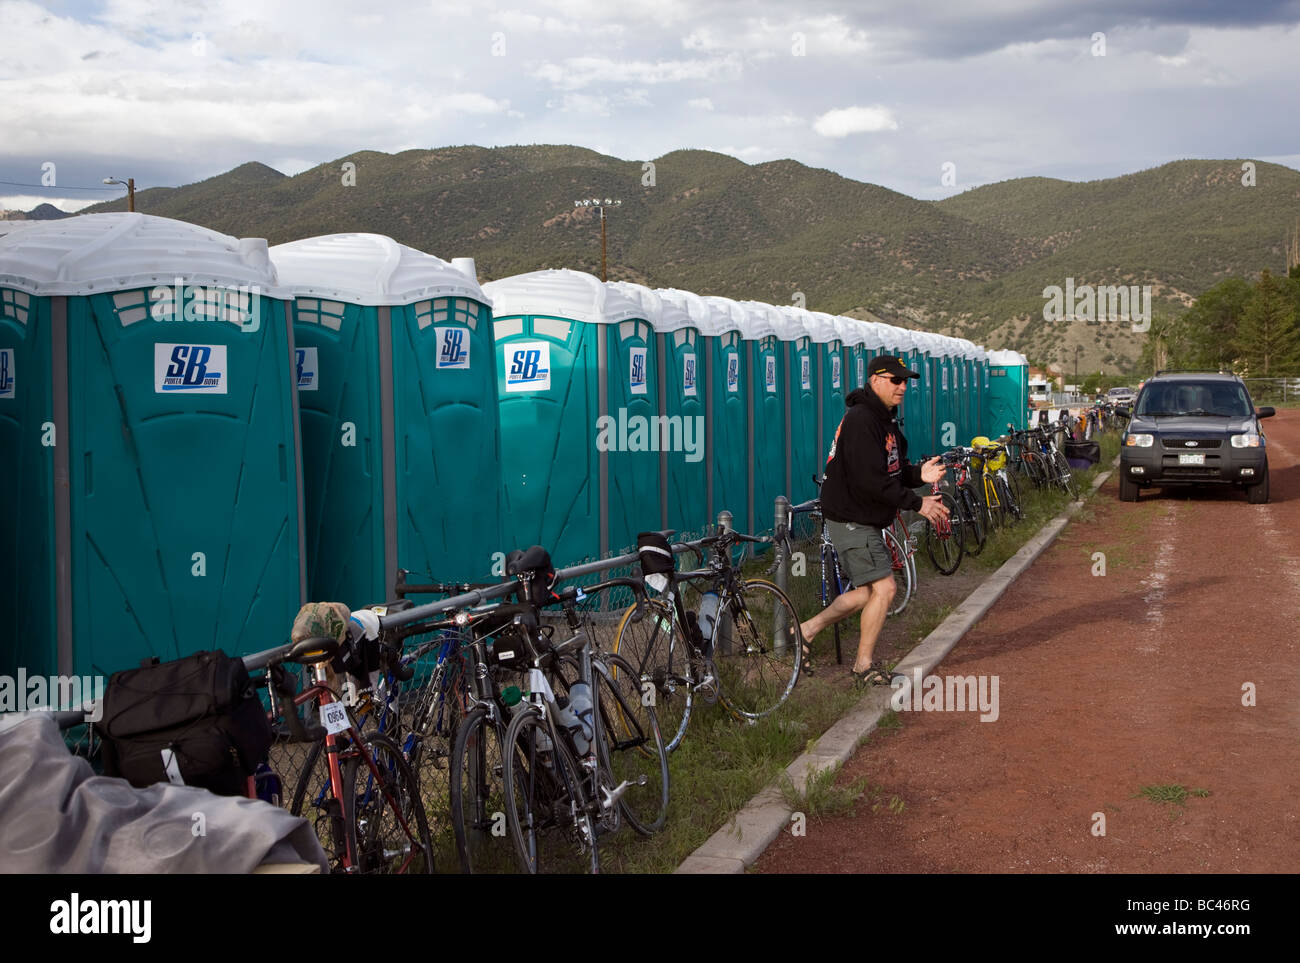 Portable toilets for cyclists camping at the Salida High School in Colorado during the annual Ride The Rockies bicycle tour Stock Photo